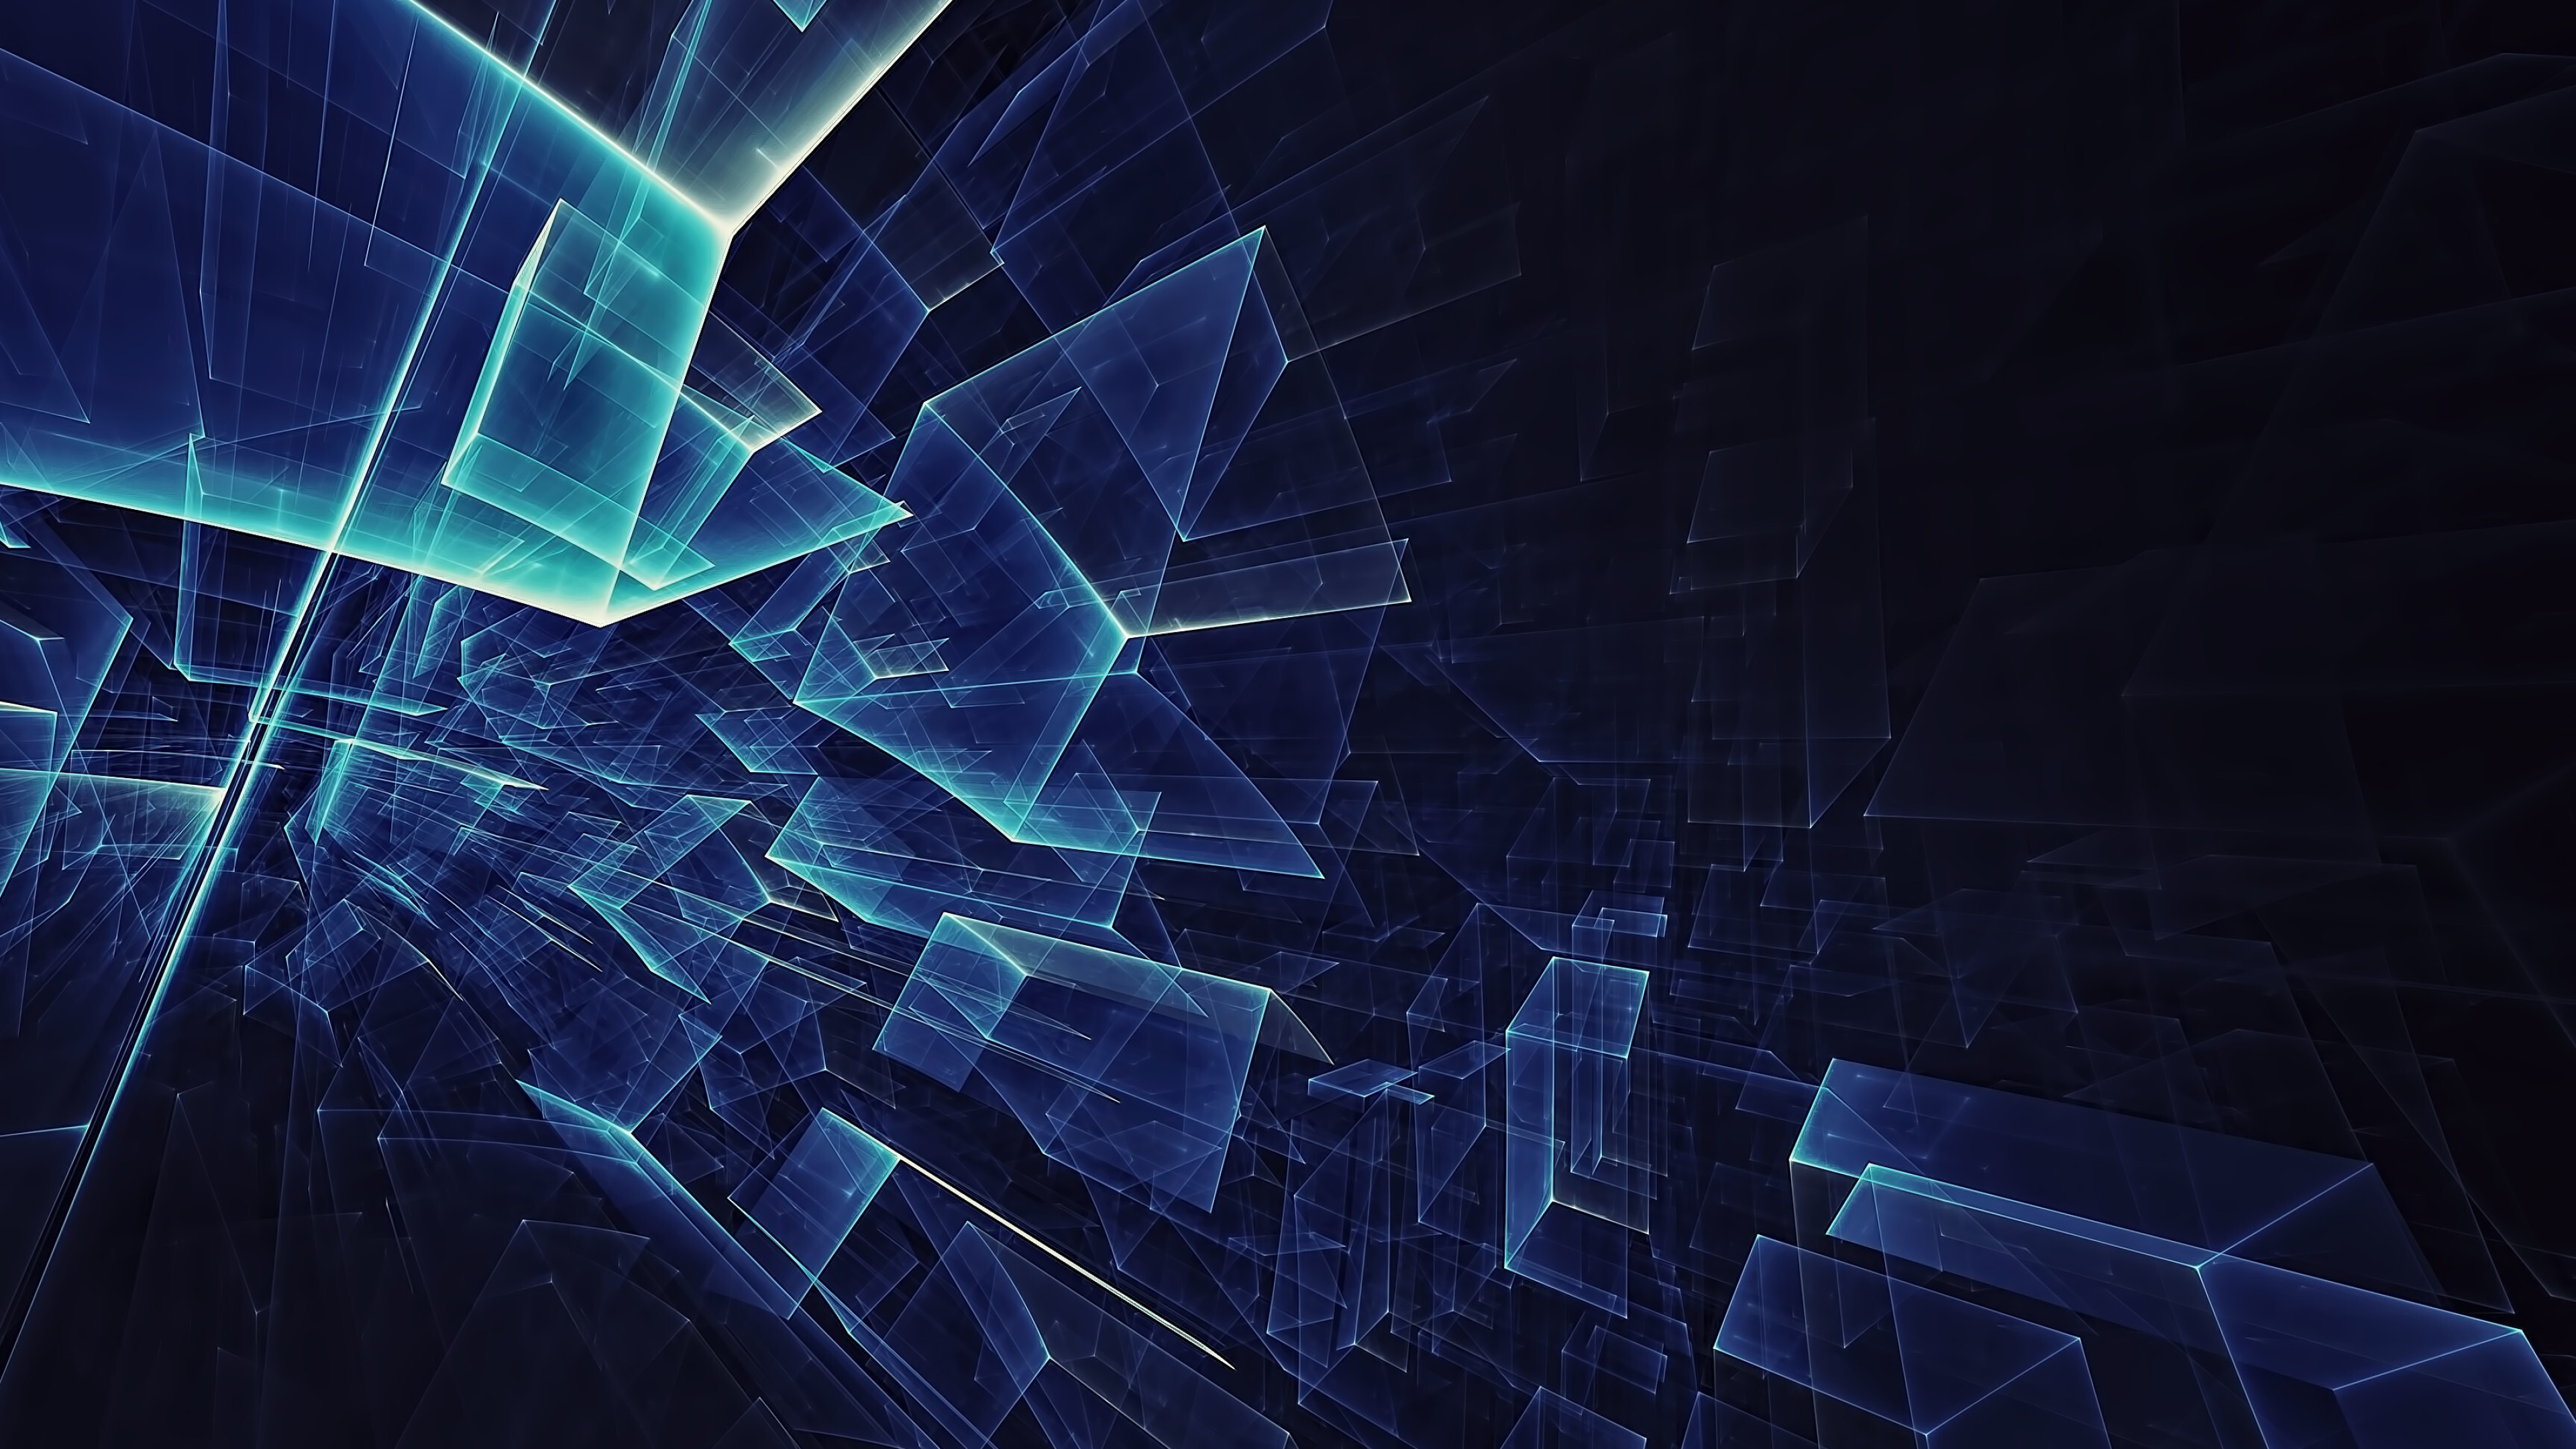 Geometry: Abstract glass, Polyhedrons, Cubes, Prisms. 3840x2160 4K Background.